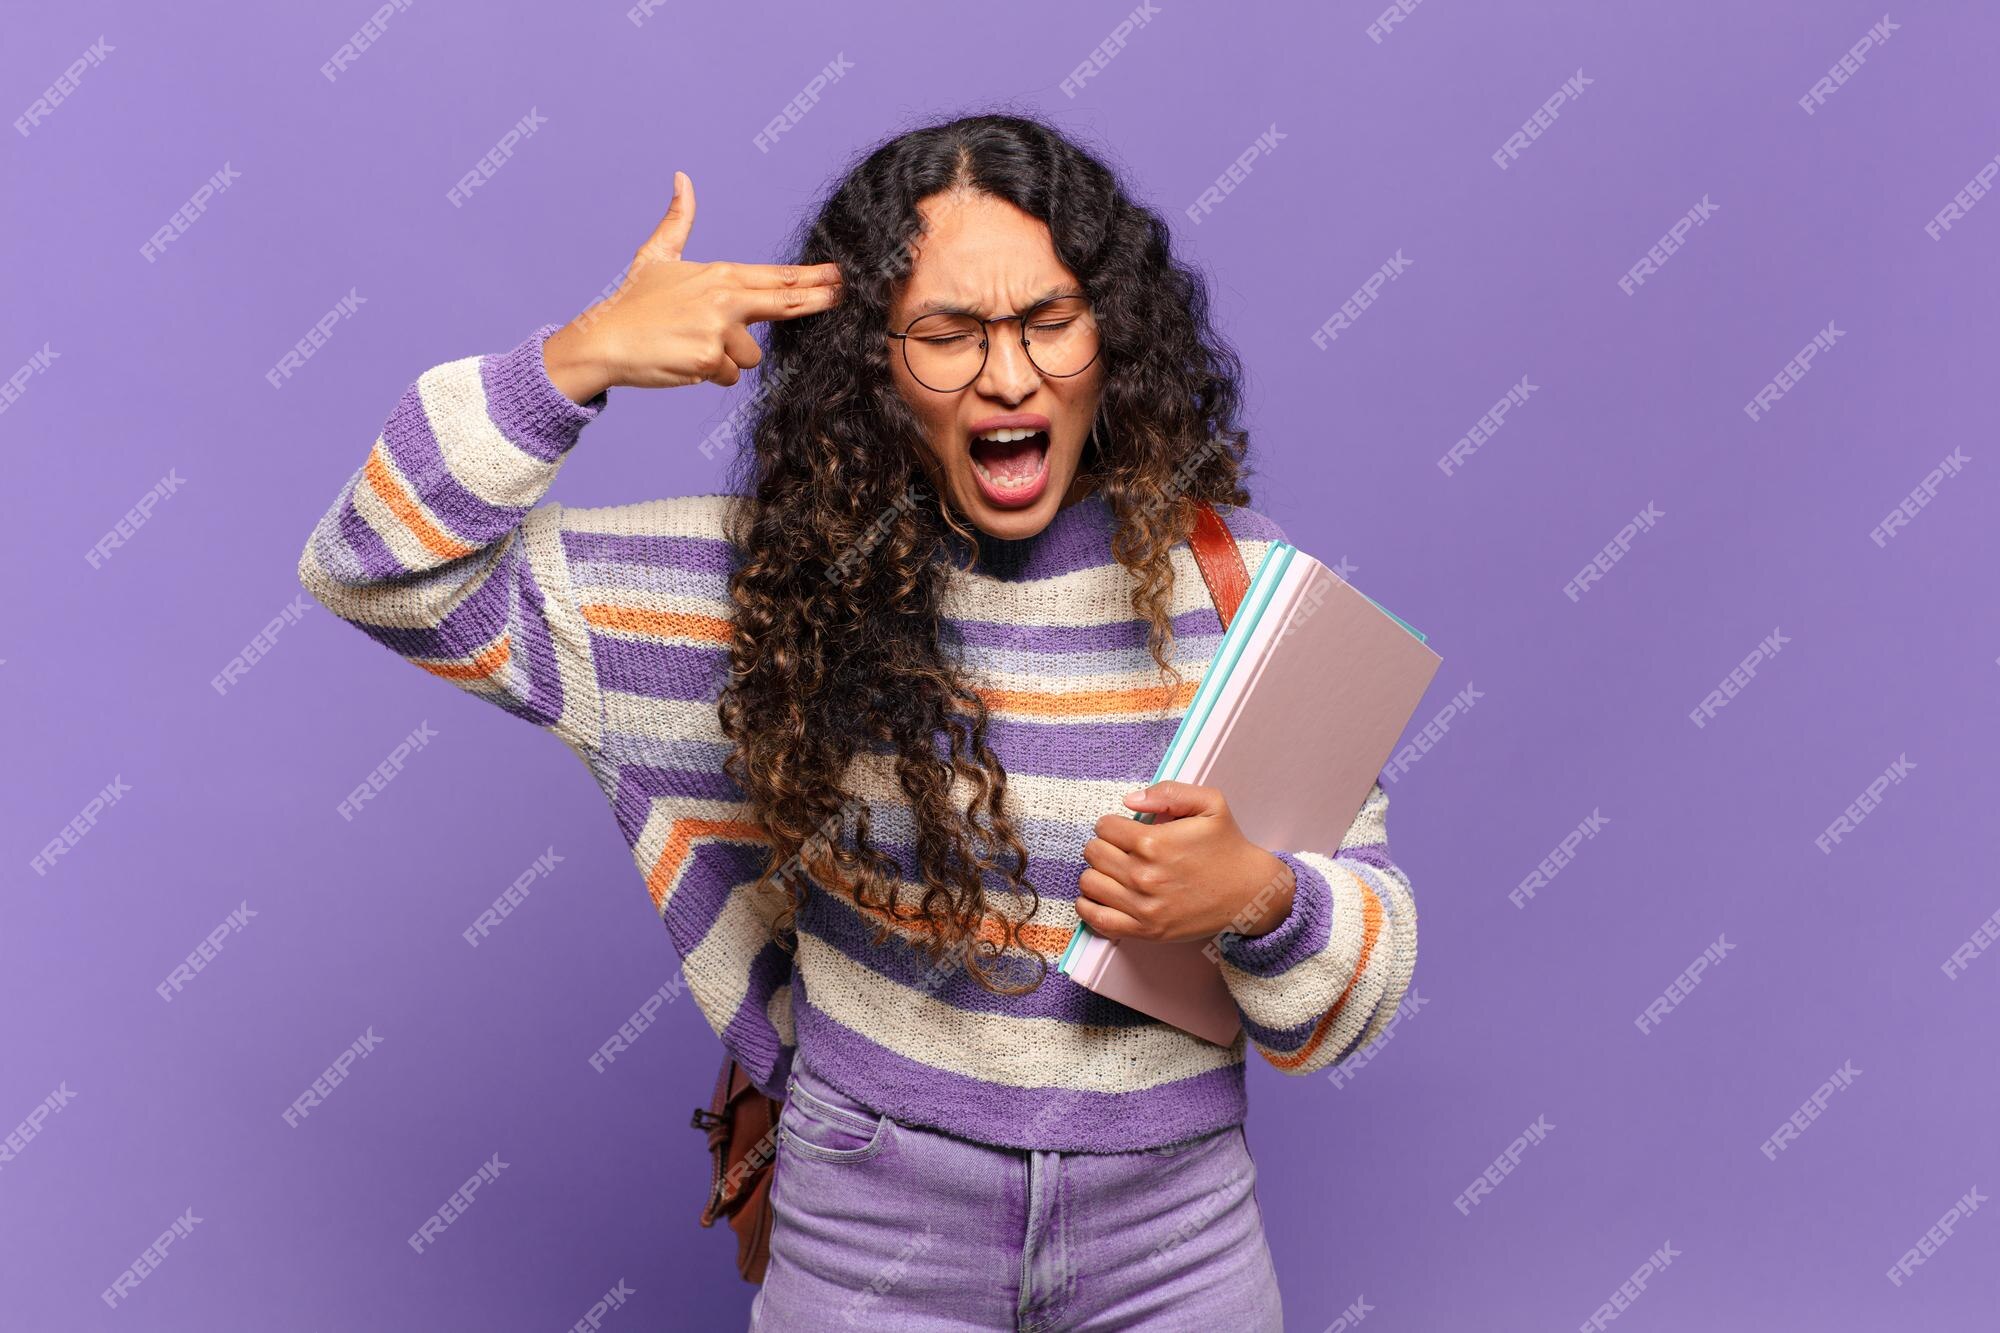 young-hispanic-woman-looking-unhappy-stressed-suicide-gesture-making-gun-sign-with-hand-pointing-head-student-concept_1194-361975.jpg